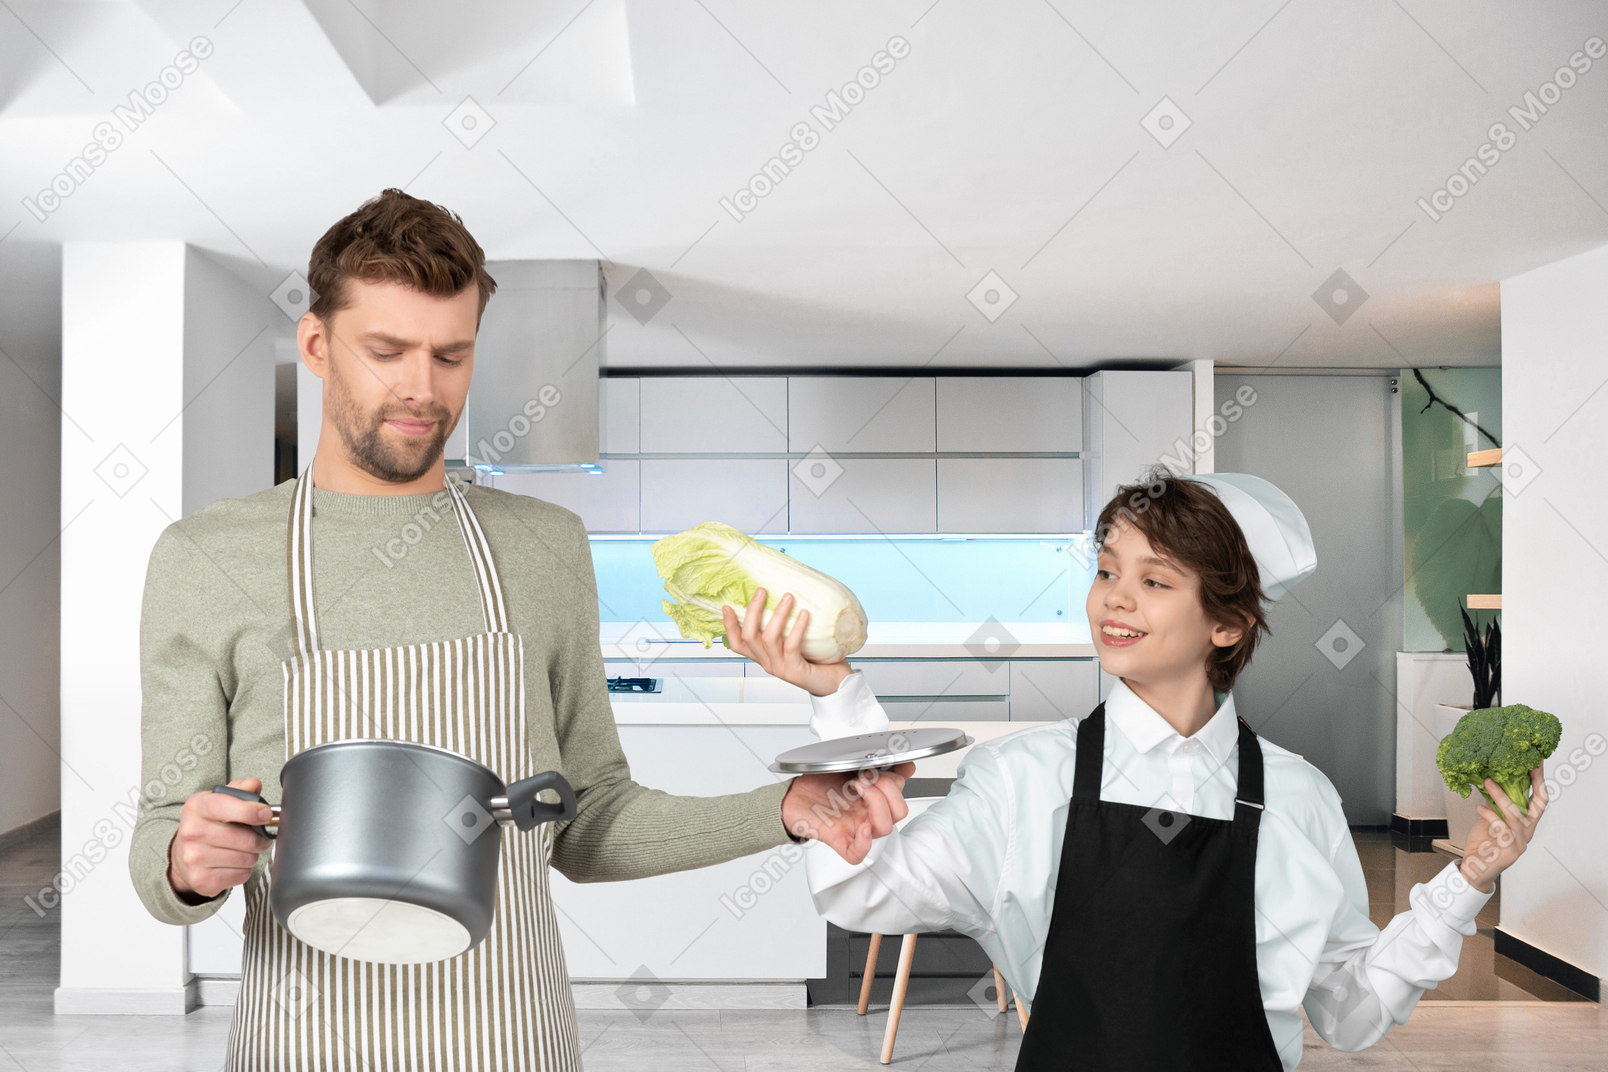 A man and a little boy preparing food in a kitchen